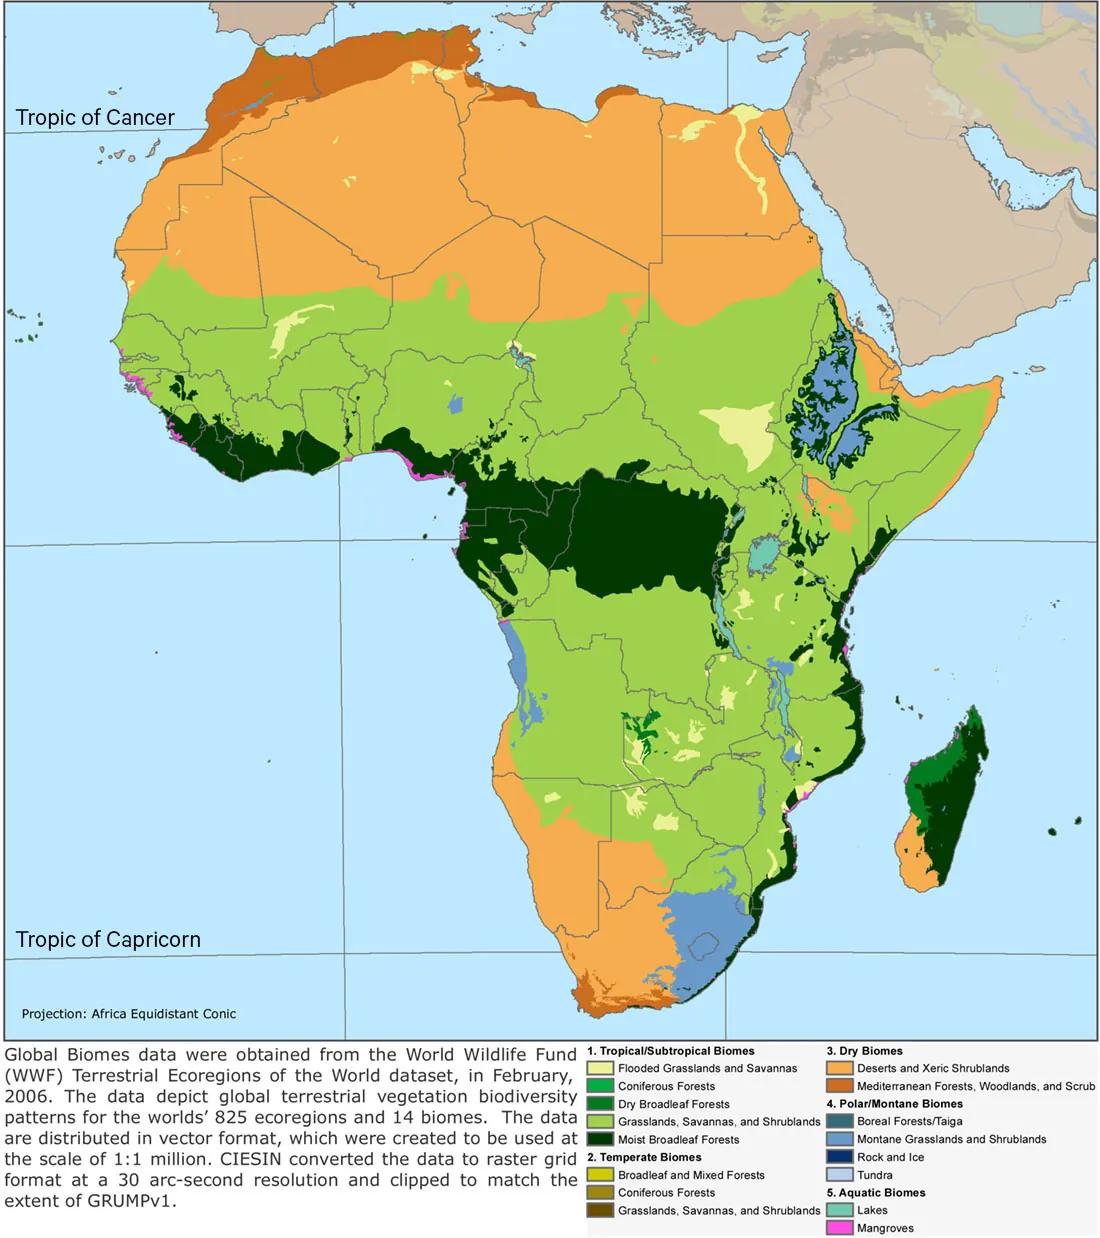 A map of Africa is shown. The Tropic of Cancer and the Tropic of Capricorn are labeled. Five different biomes are represented in varying degrees of colors: 1. Tropical/Subtropical Biomes which show Flooded Grasslands and Savannas in light yellow (small areas in several locations all around Africa), Coniferous Forests in green (none on this map), Dry Broadleaf Forests in dark green (located mostly on the northwestern coast of Madagascar and in a small inland location in southern Africa), Grasslands, Savannas, and Shrublands in light green (located throughout most of the middle third of Africa), and Moist Broadleaf Forests in dark green (located on the eastern half of Madagascar, in a thin slice along the eastern coast of Africa, and running in a horizontal section in the middle of Africa). 2. Temperate Biomes which show Broadleaf and Mixed Forests in mustard yellow (none on this map), Coniferous Forests in brown (none on this map), and Grasslands, Savannas, and Shrublands in dark brown (none on this map). 3. Dry Biomes show Deserts and Xeric Shrublands in light orange (located in the north and south and in some small areas in between as well as in the south of Madagascar) and Mediterranean Forests, Woodlands, and Scrub in dark orange (located at the northern and southern tips of the continent). 4. Polar/Montane Biomes which show Boreal Forests/Taigas in denim blue (none on this map), Montane Grasslands and Shrublands in blue (located in the south as well as in the east and in small areas throughout the continent), Rock and Ice in dark blue (none on this map) and Tundra in light blue (located in patches on the eastern side of the continent). 5. Aquatic Biomes which show Lakes in seafoam green (located in the a few spots in the western part of Africa) and Mangroves in pink (shown in small areas along the coasts of the continent and Madagascar).